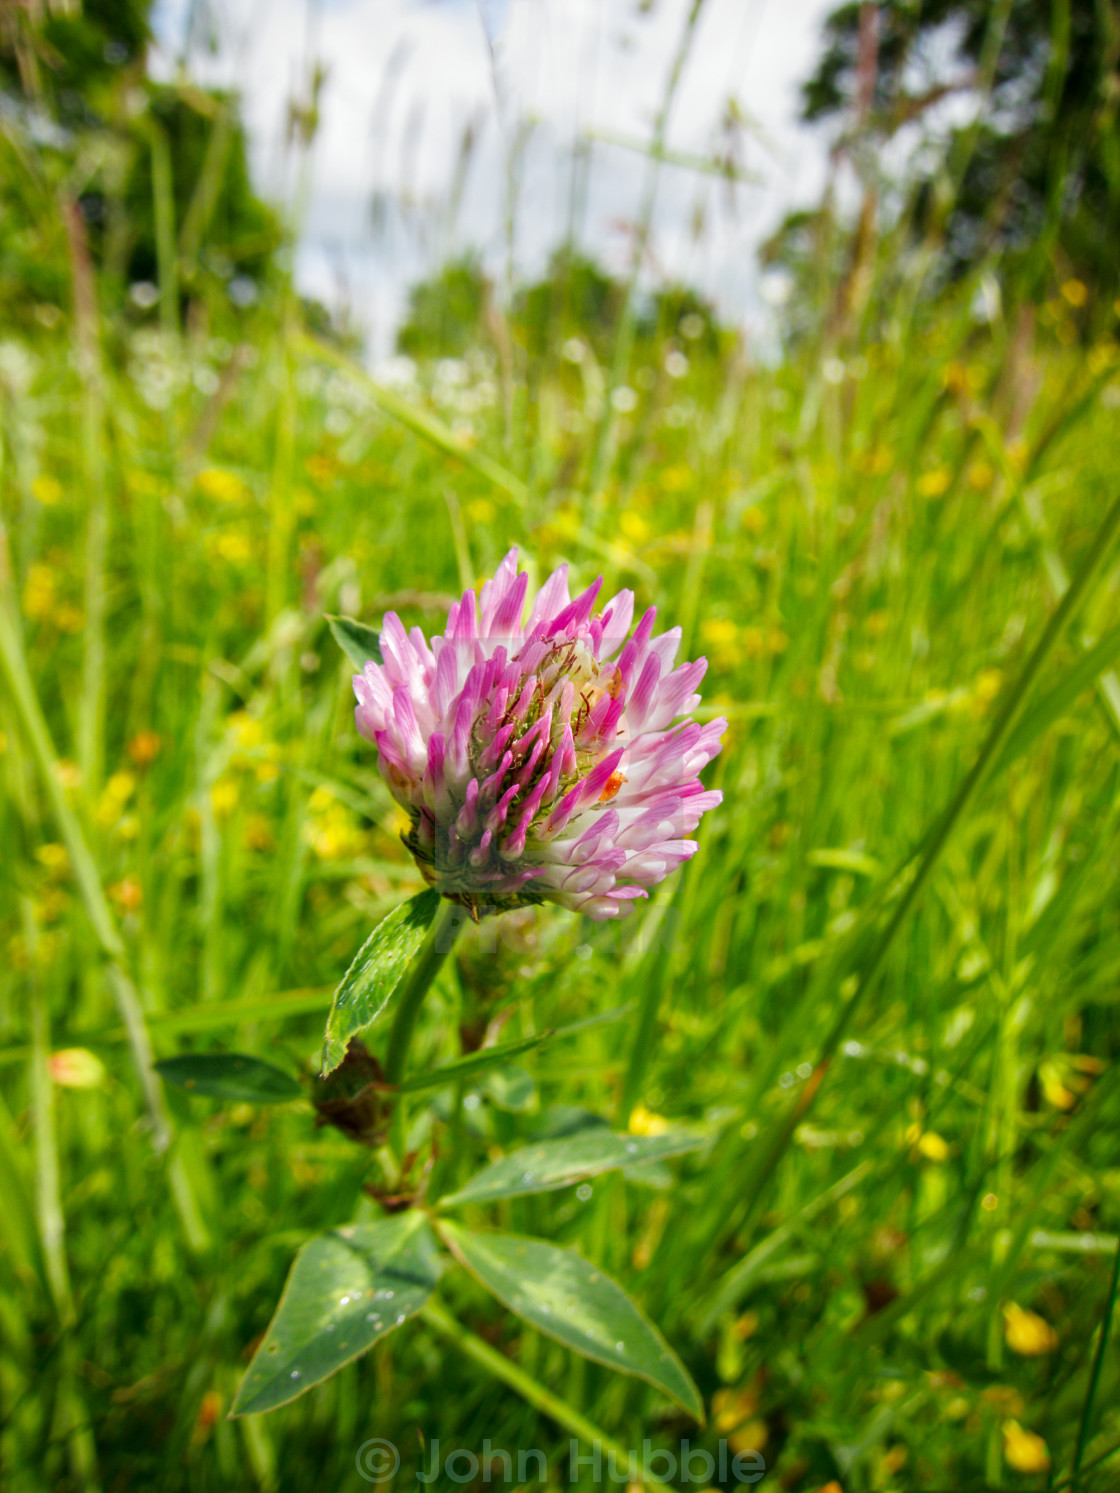 "Red Clover" stock image